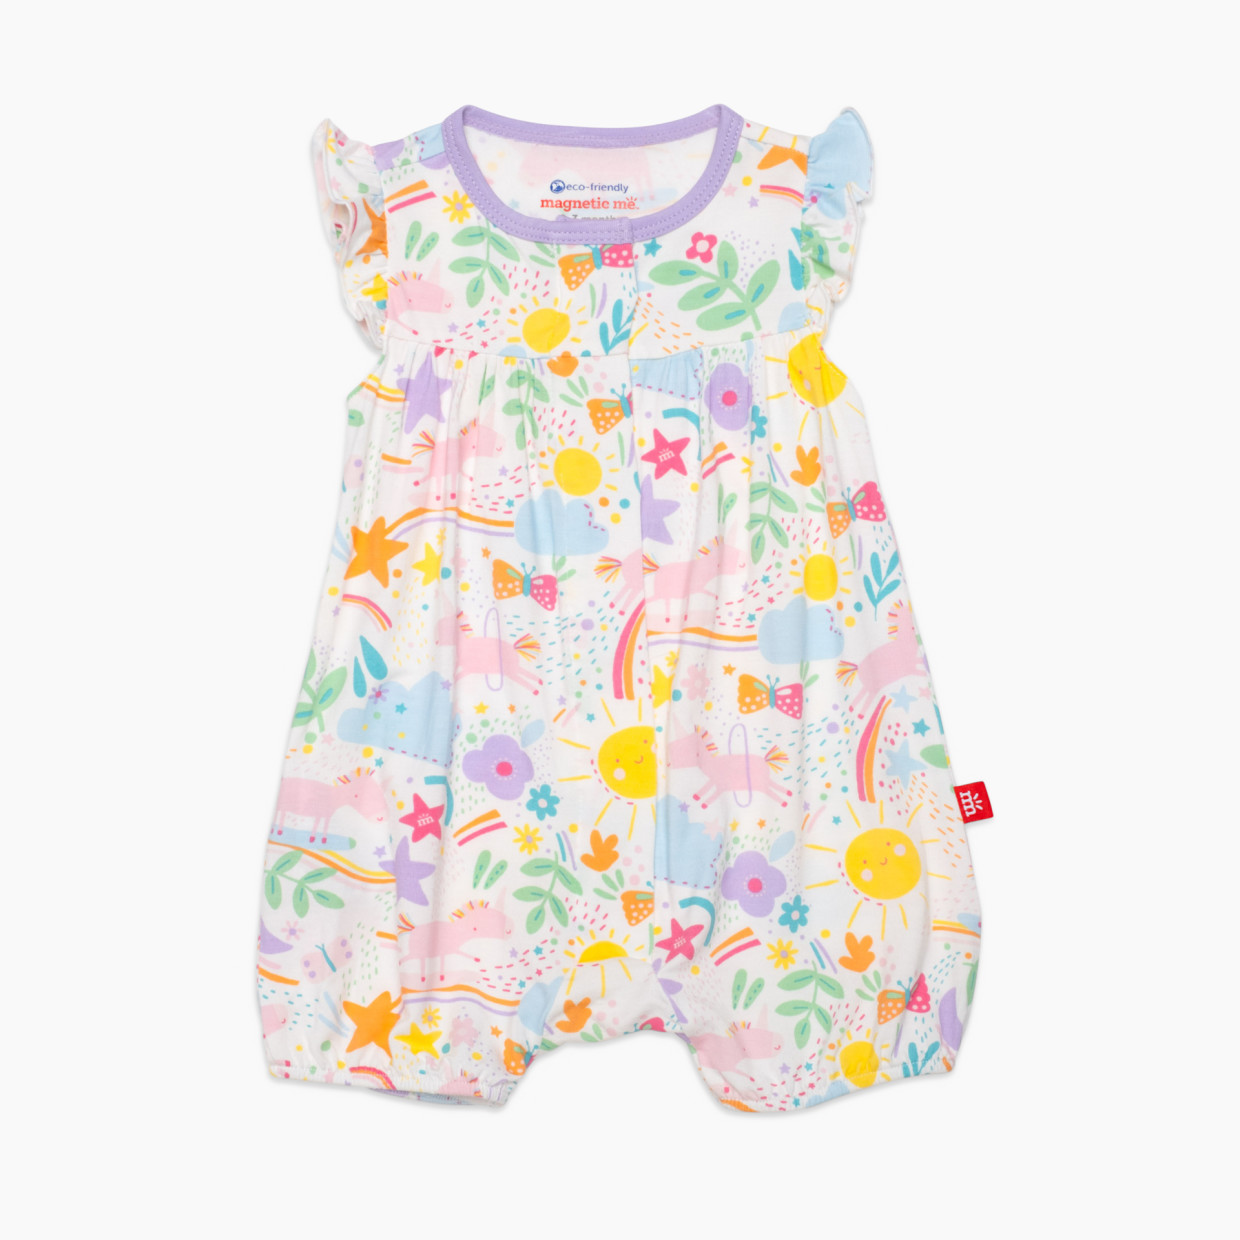 Magnetic Me Modal Magnetic Romper - Sunny Day Vibes, 3-6 M.